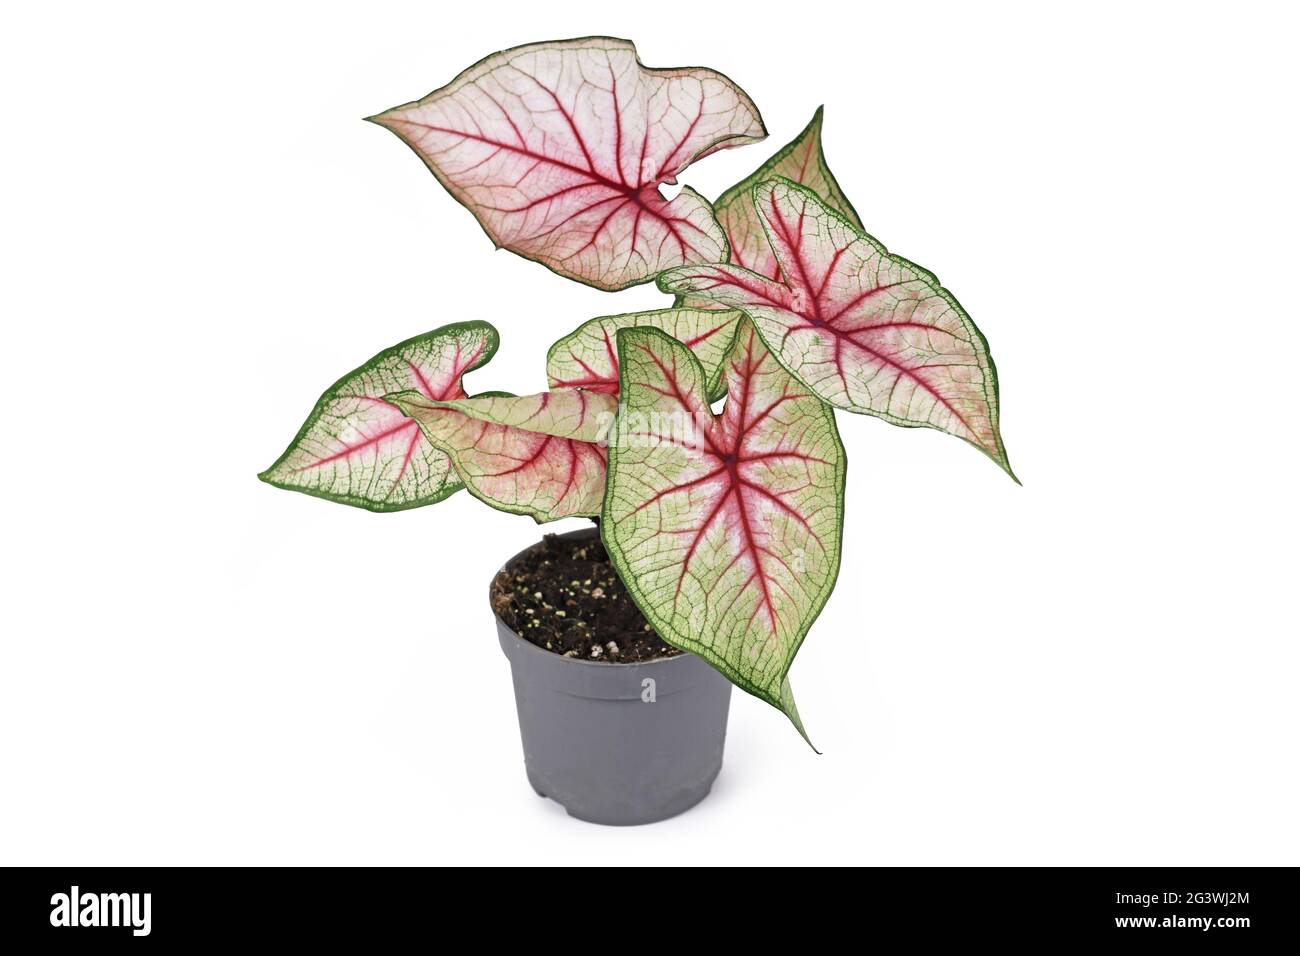 Beautiful exotic 'Caladium White Queen' plant with white leaves and pink veins in pot isolated on white background Stock Photo